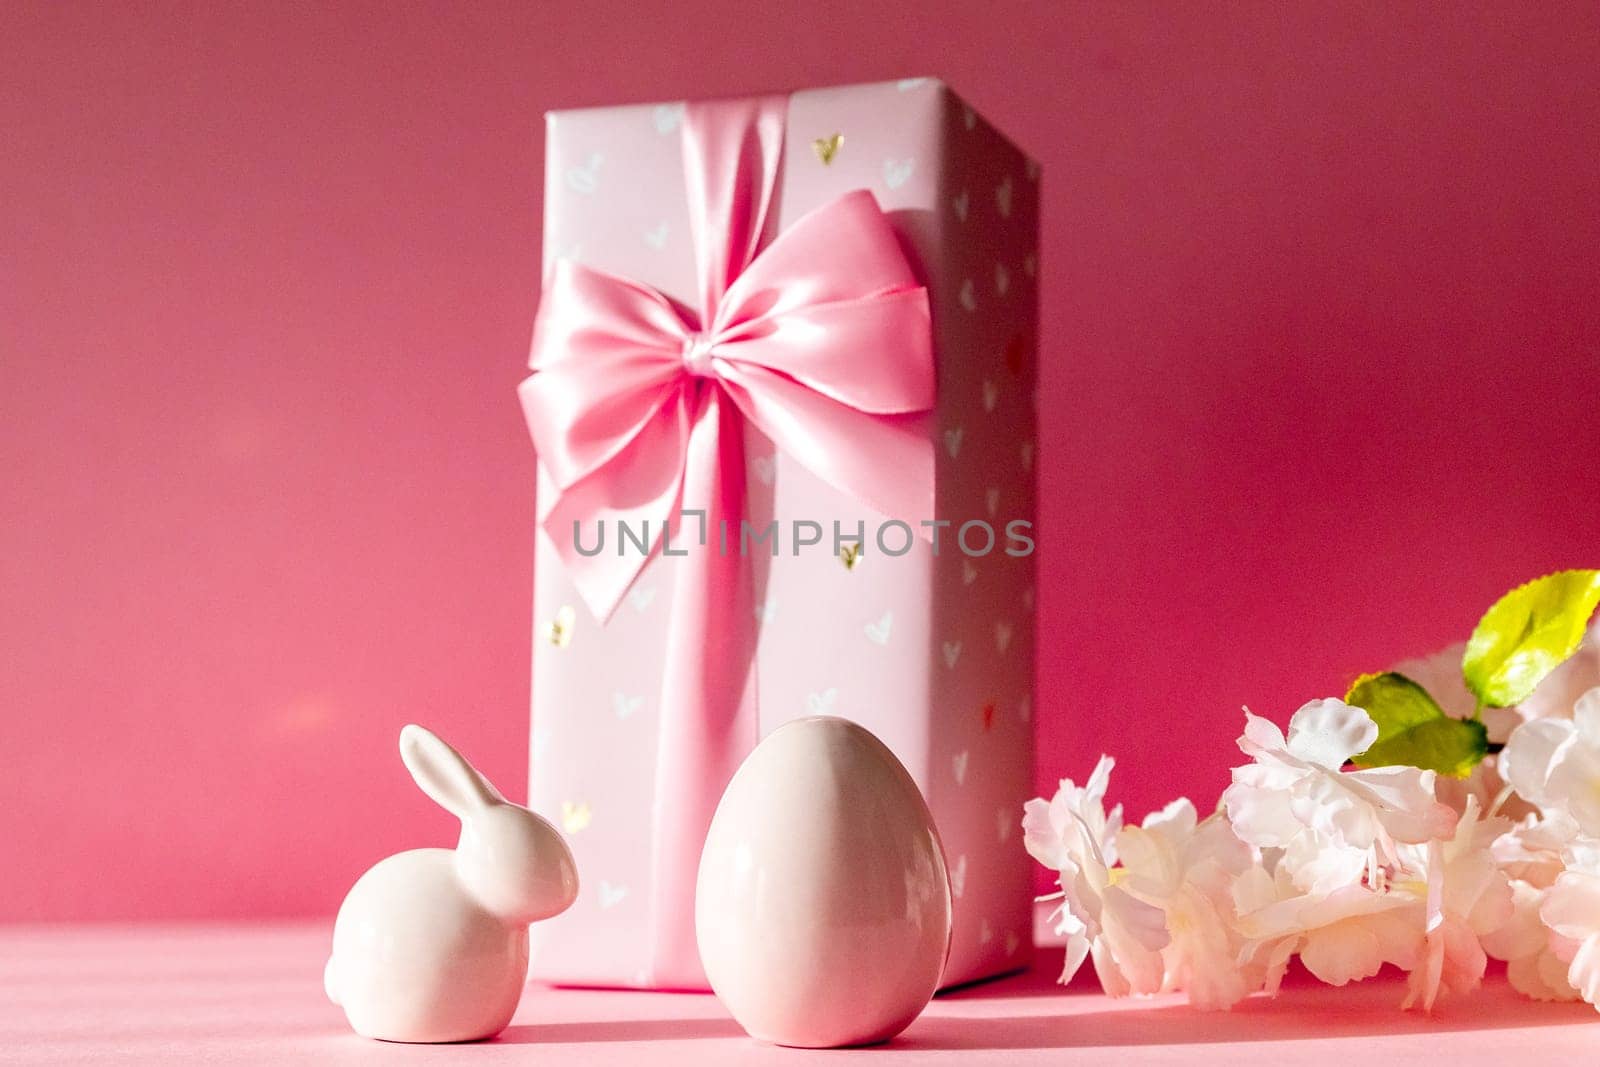 Porcelain figurines of Easter eggs, a bunny, a large gift box, and a branch of apple tree flowers stand on a pink background, close-up side view with selective focus.